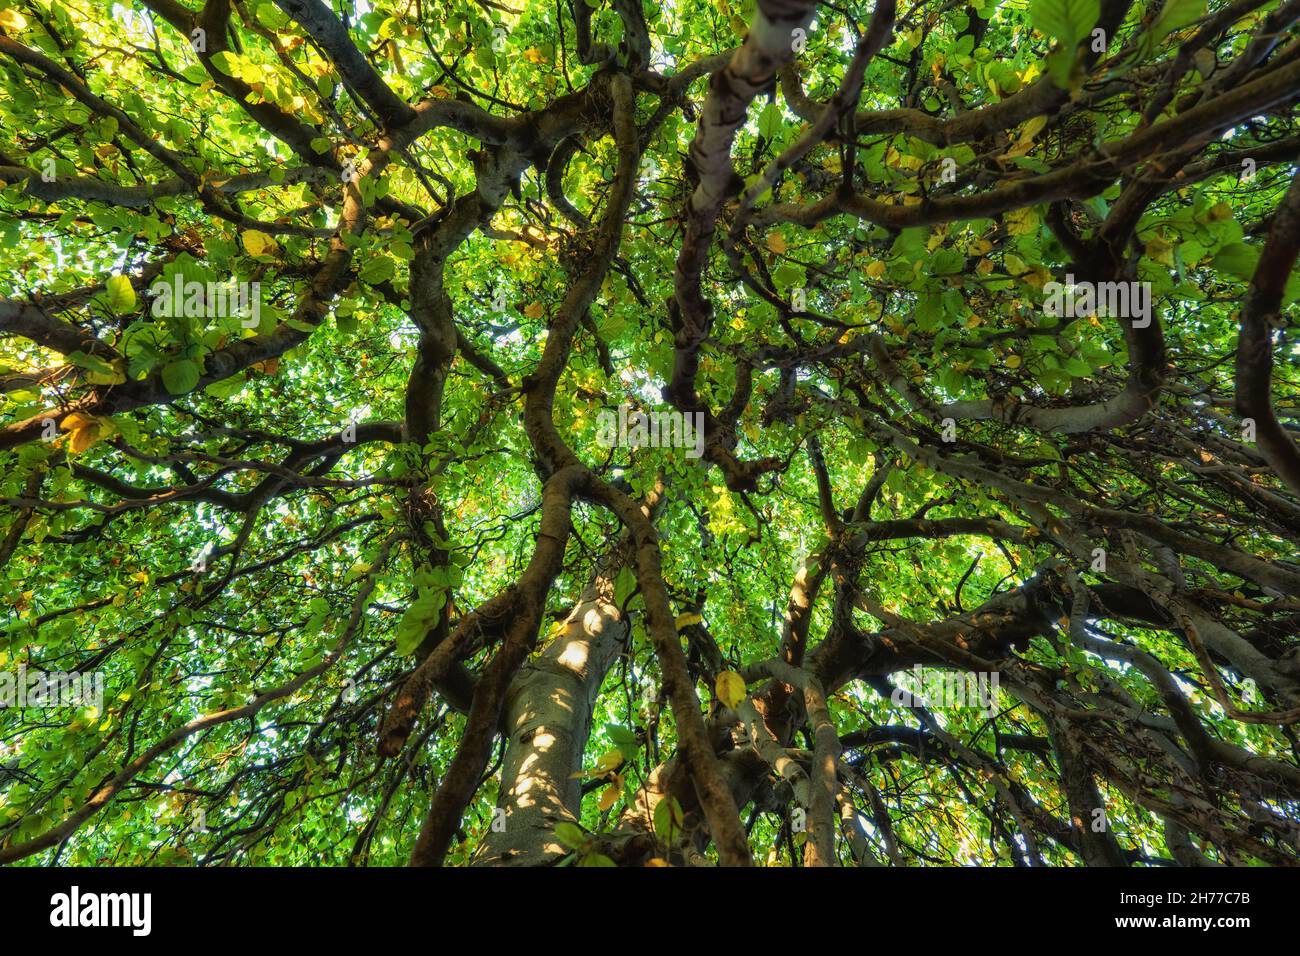 Majestic canopy of an old tree, dense green foliage with trunk, leaves and branches, natural background. Stock Photo